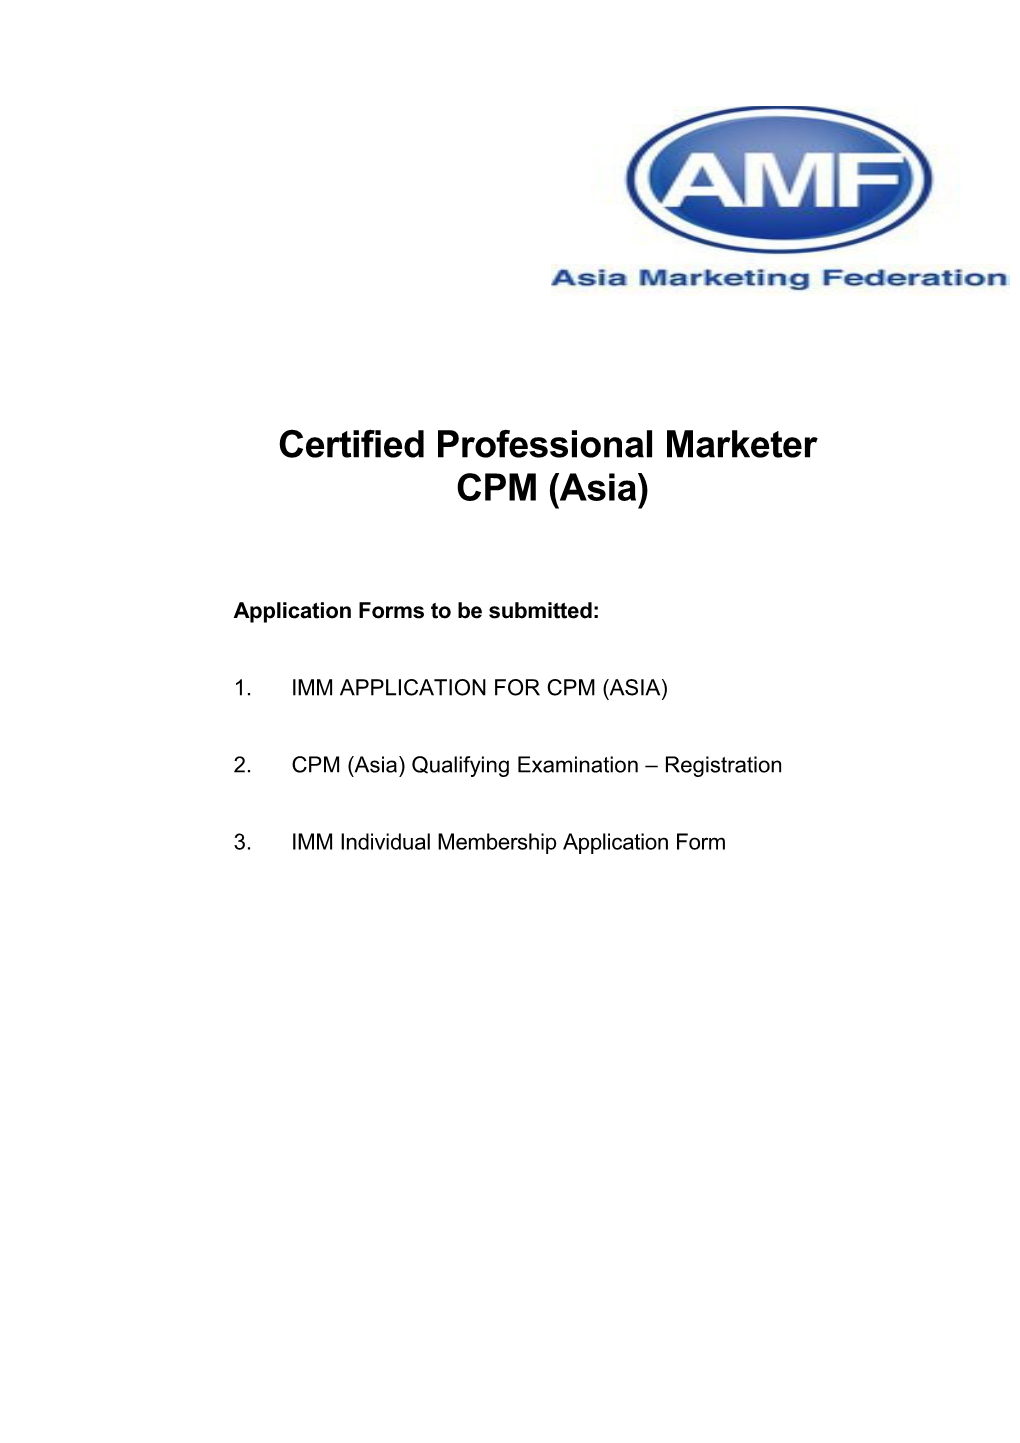 Certified Professional Marketer CPM (Asia)